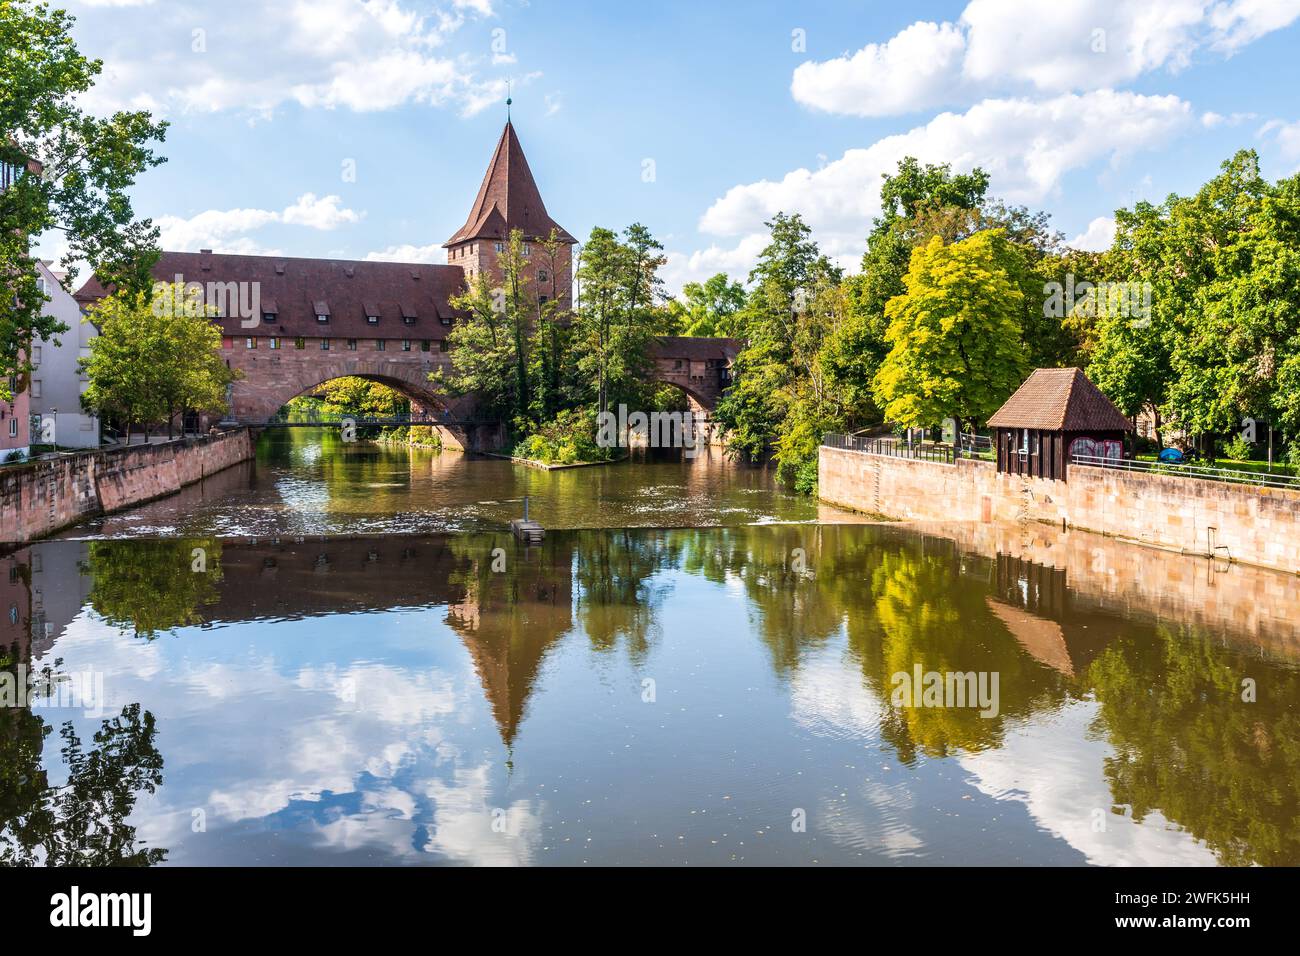 The Fronveste building and the Schlayerturm (tower) are part of the fortifications of the old town of Nuremberg, Germany, on the Pegnitz river. Stock Photo